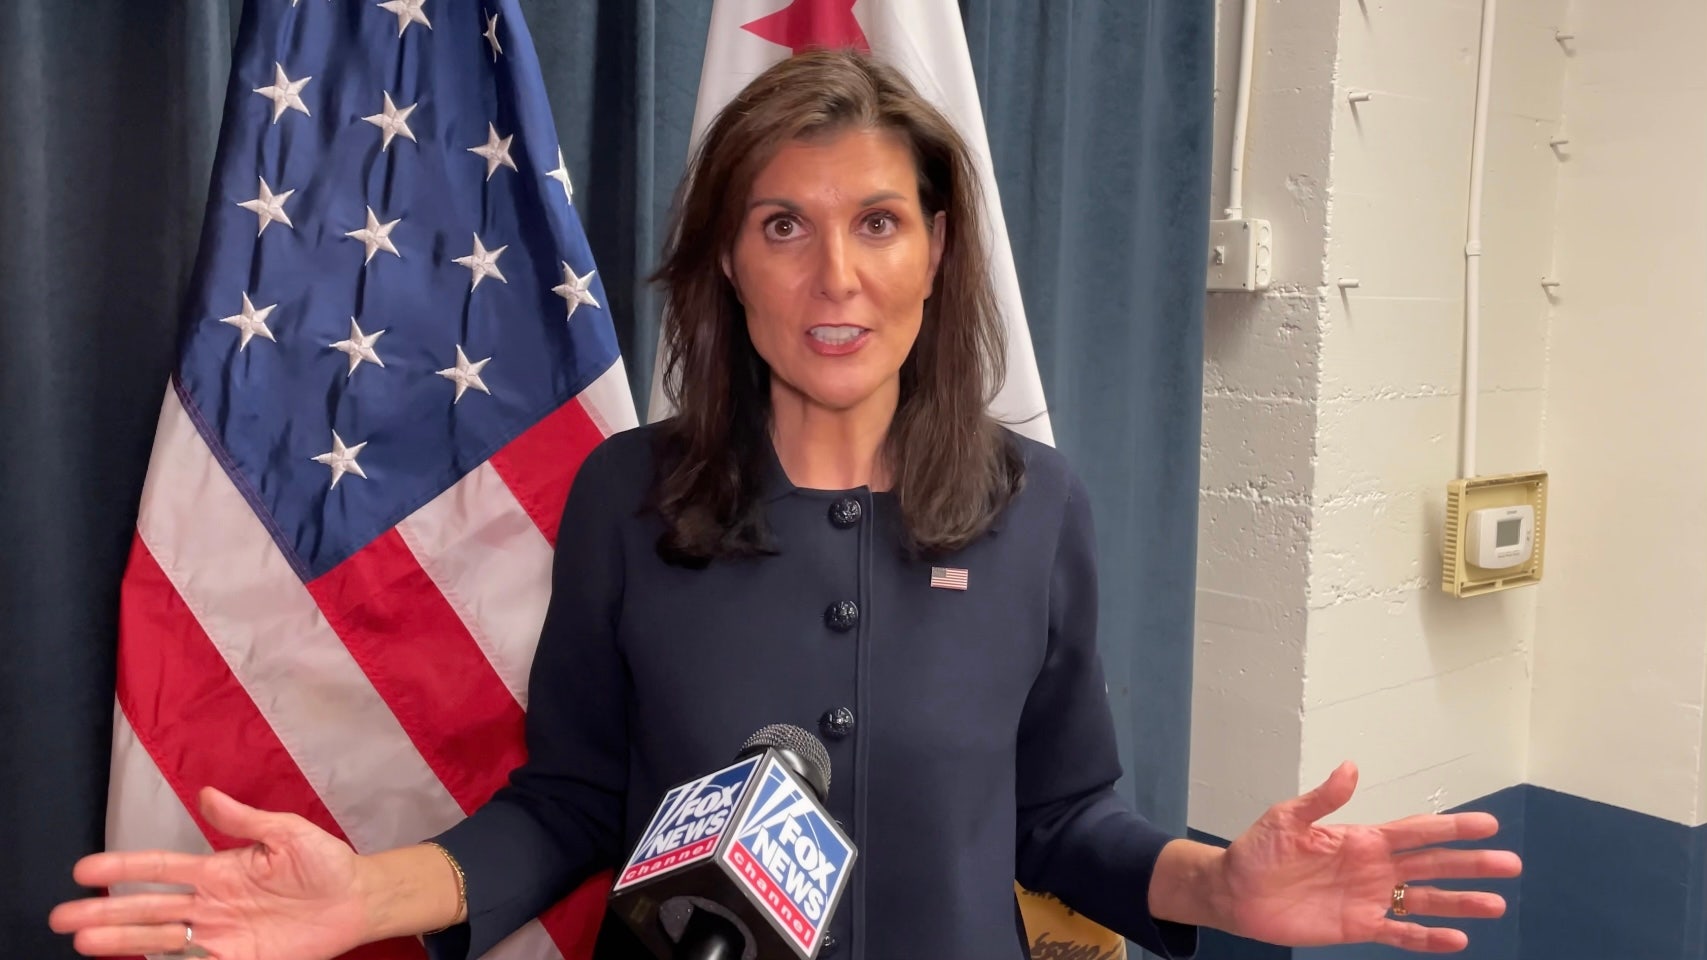 Haley reups calls for Biden to take mental competency test